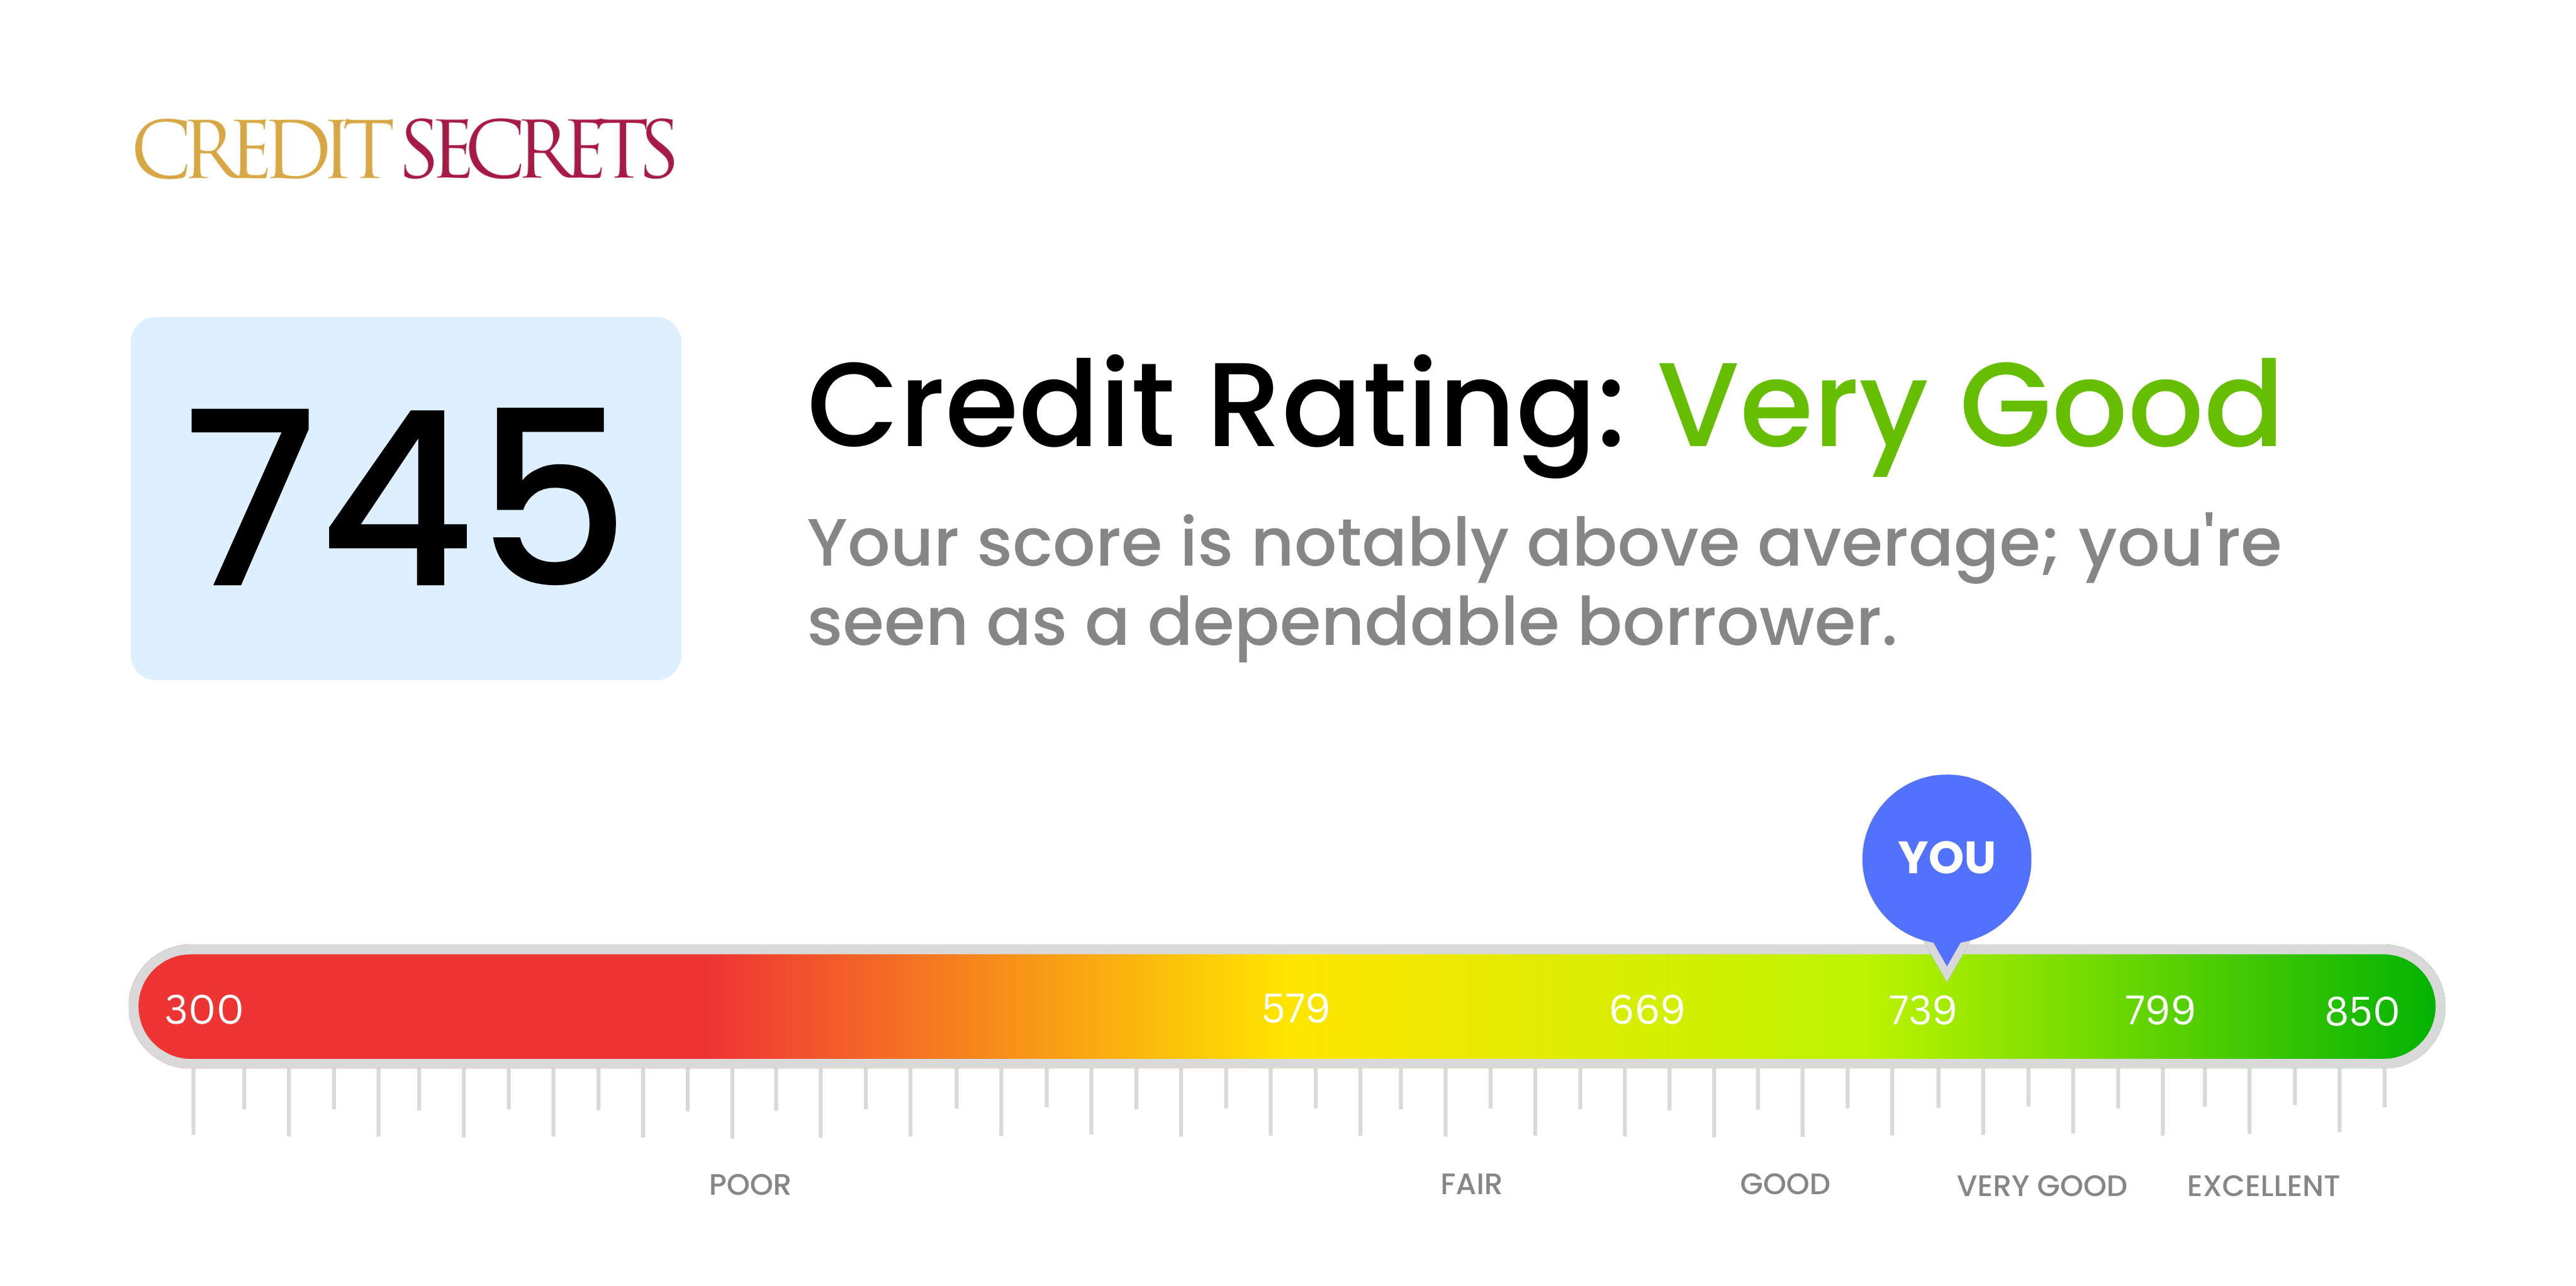 Is 745 a good credit score?